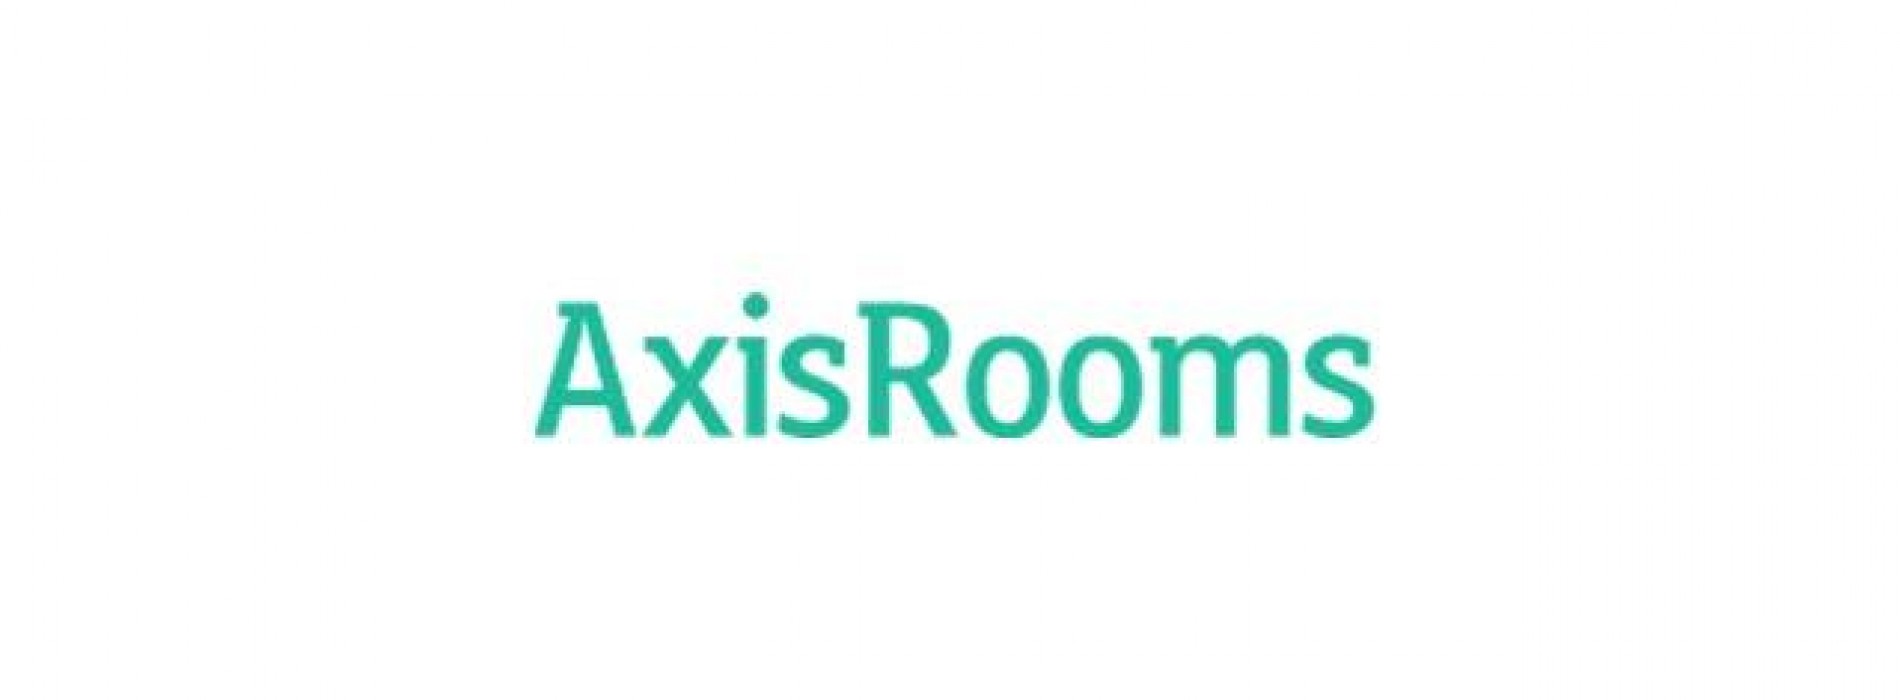 AxisRooms’ technology now connects with Airbnb